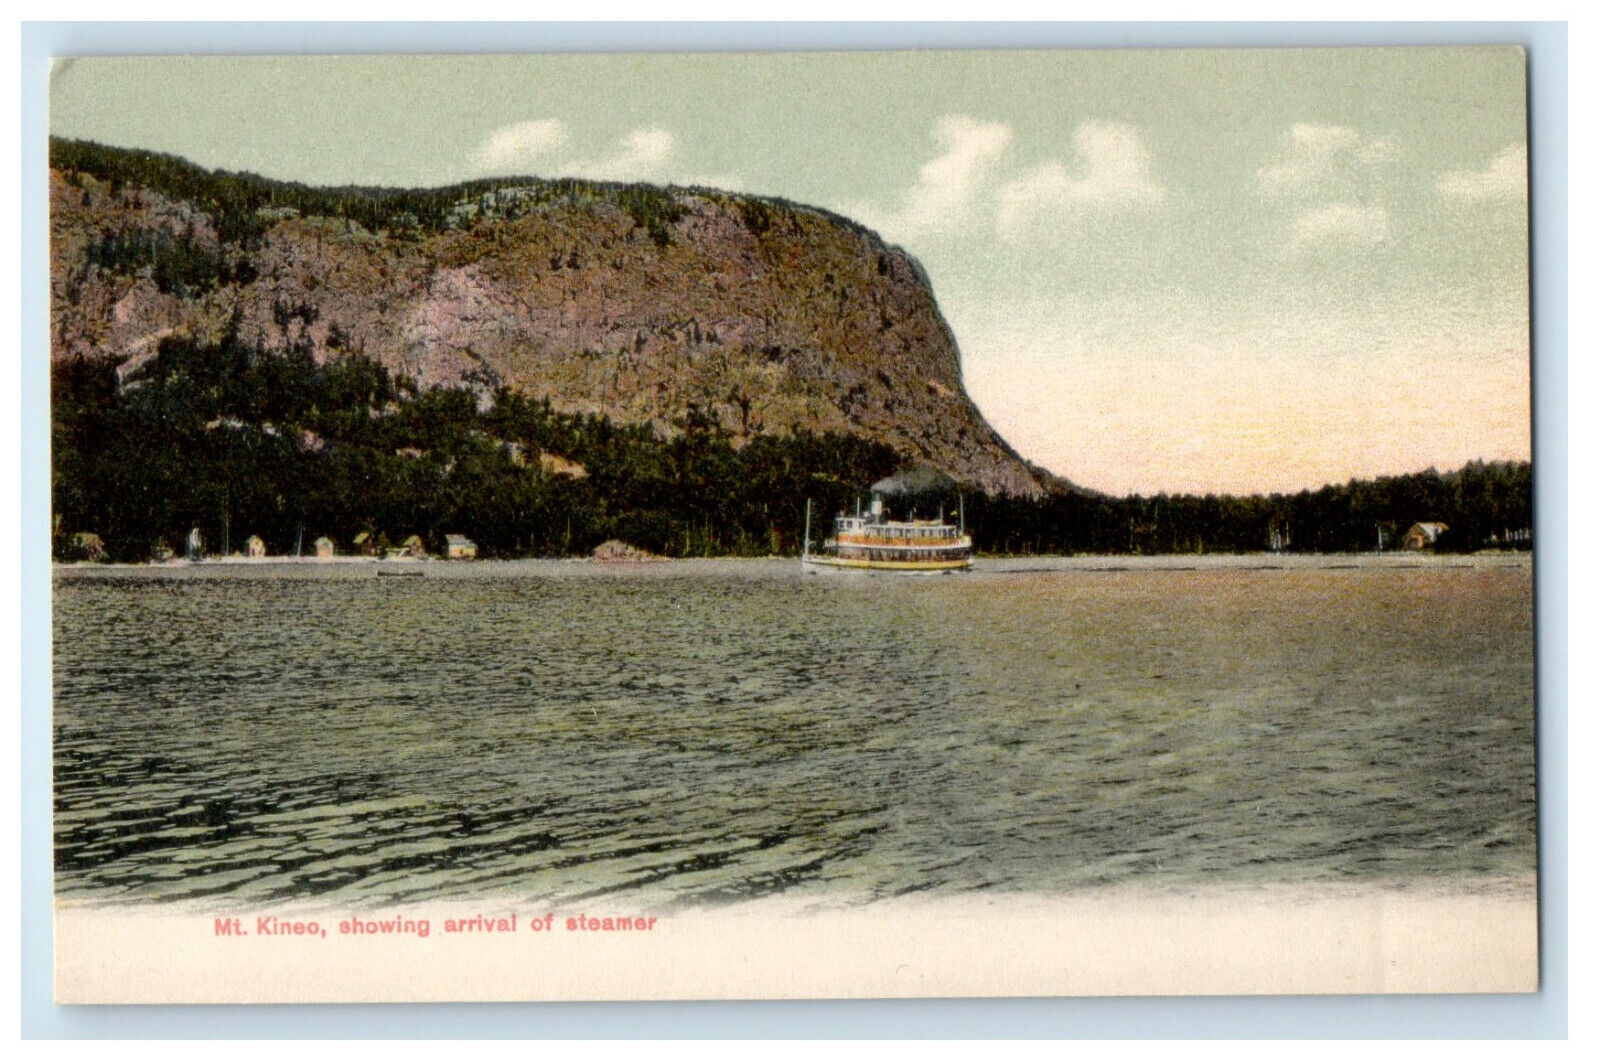 c1905 Mt. Kineo Showing Arrival of Steamer, Maine ME Unposted Antique Postcard